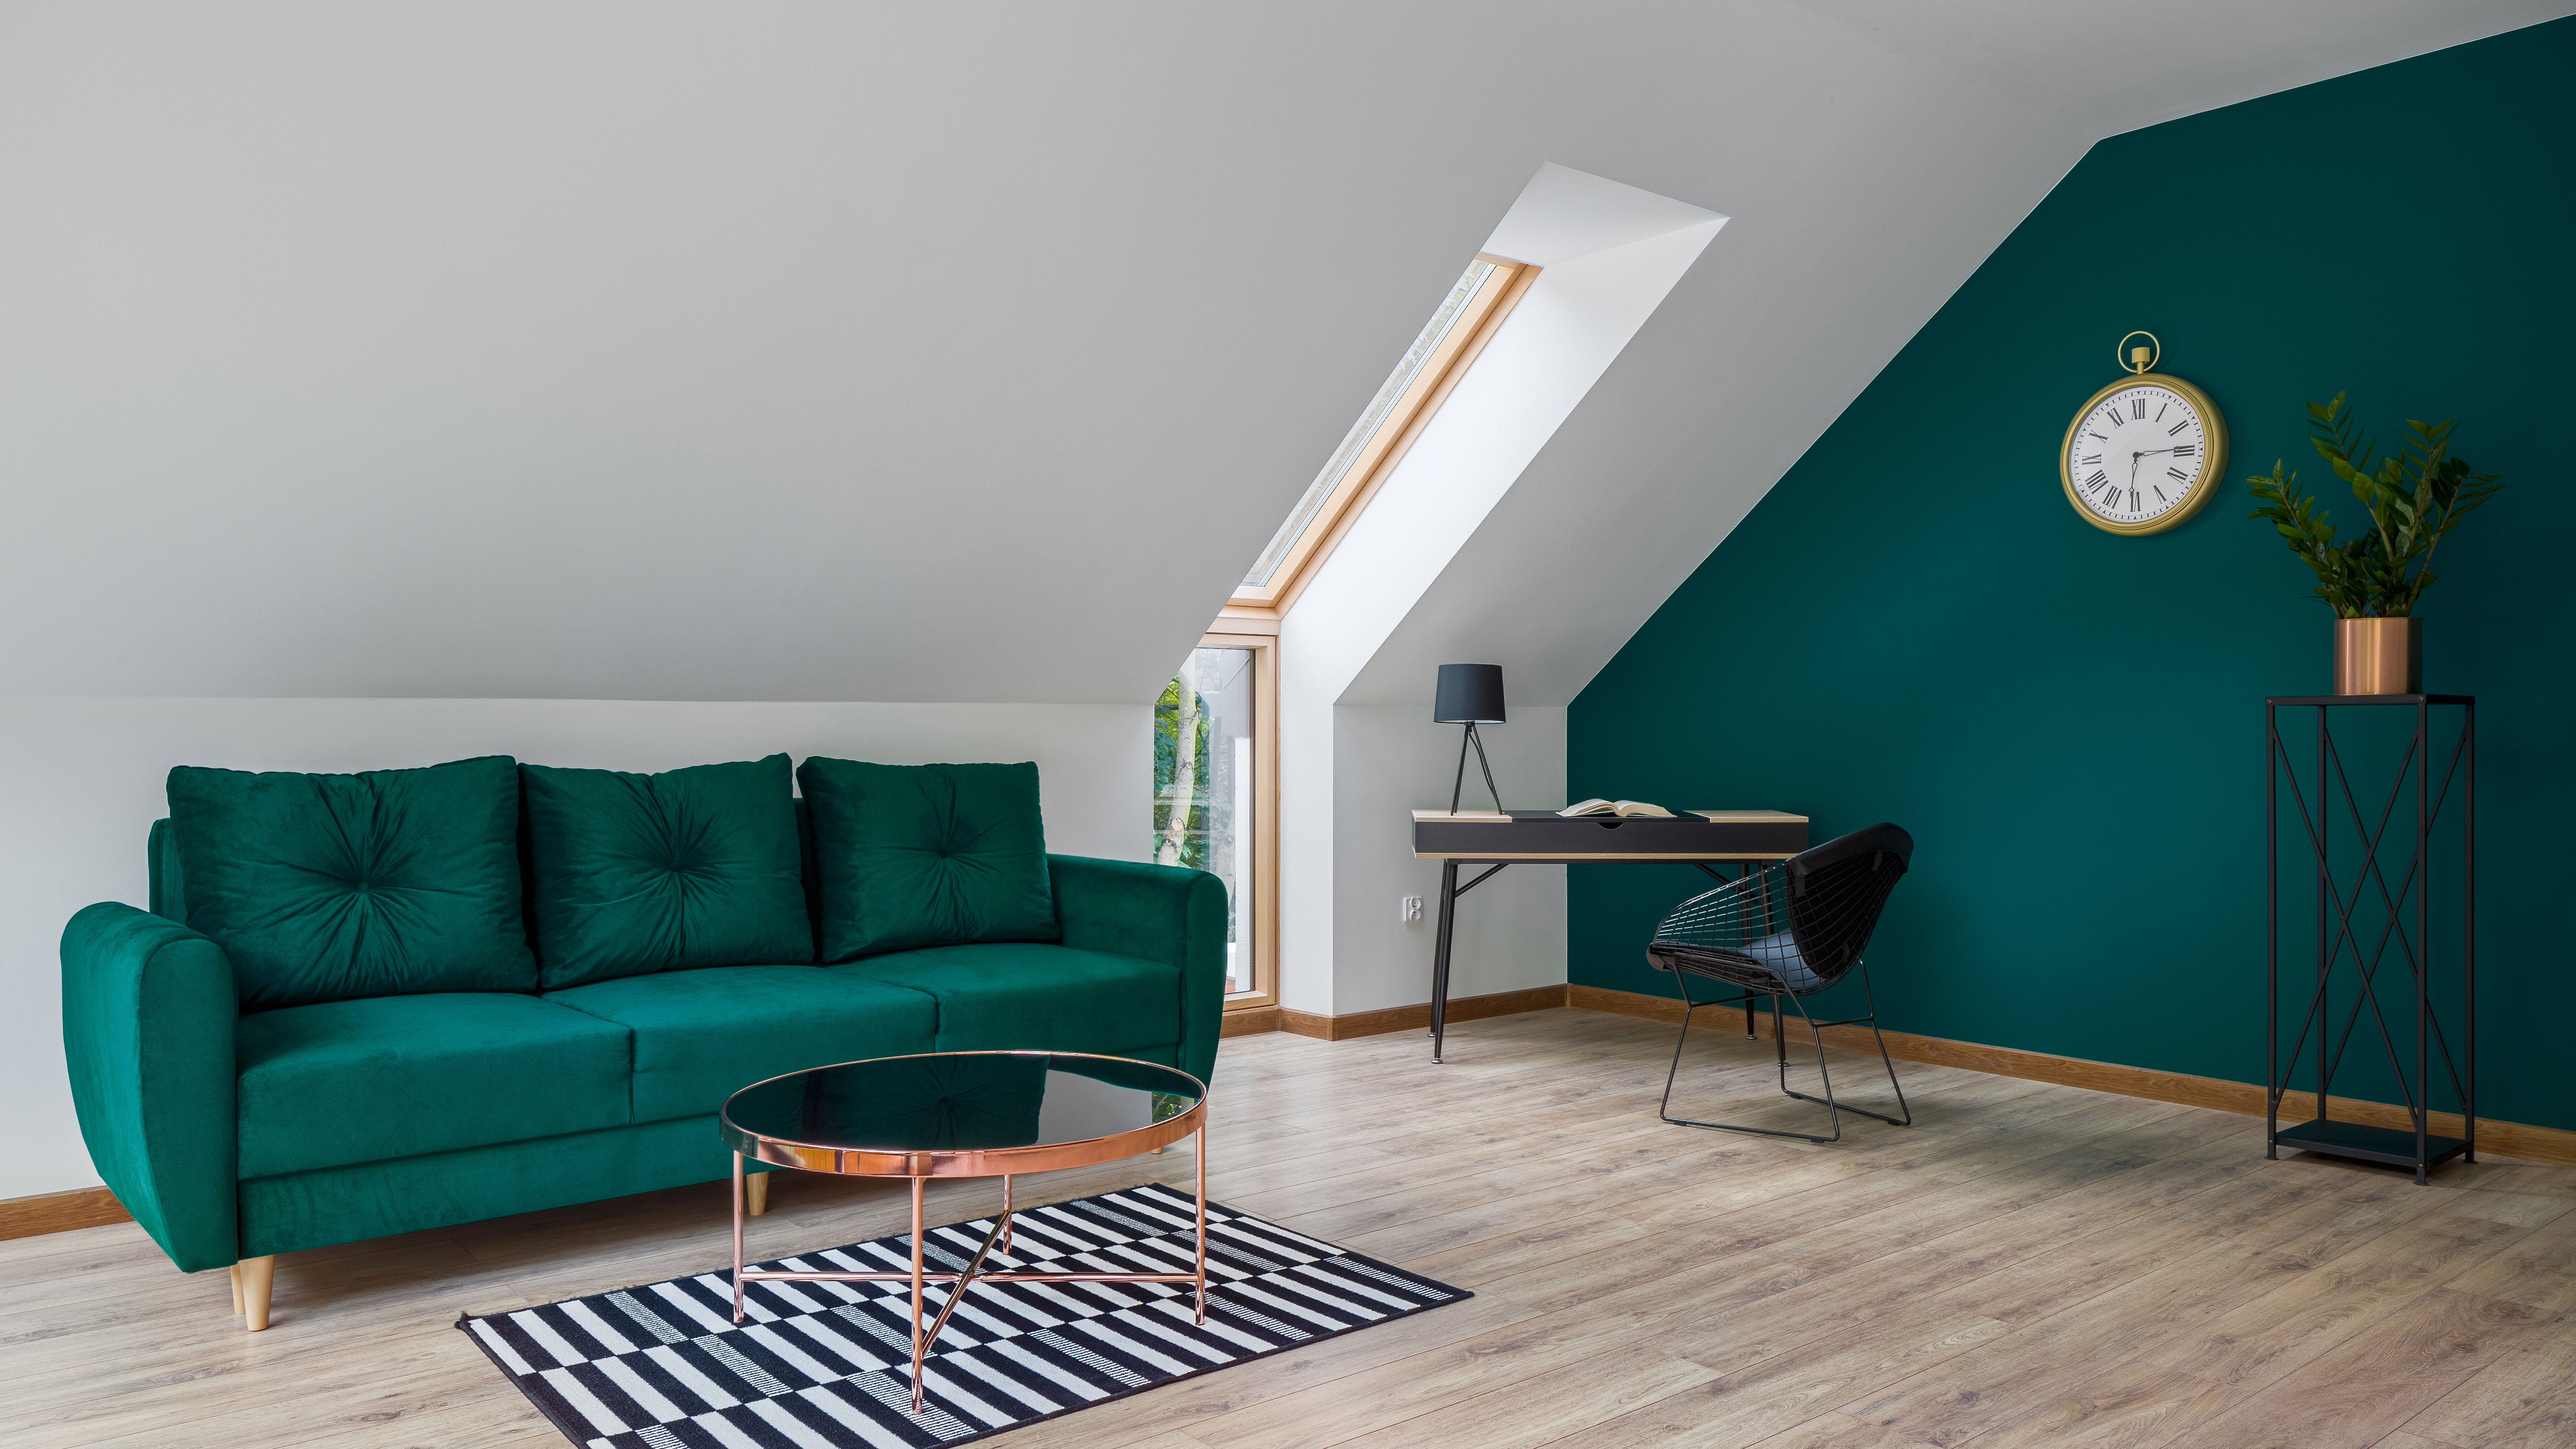 A home office in the loft with a green sofa and green accent wall